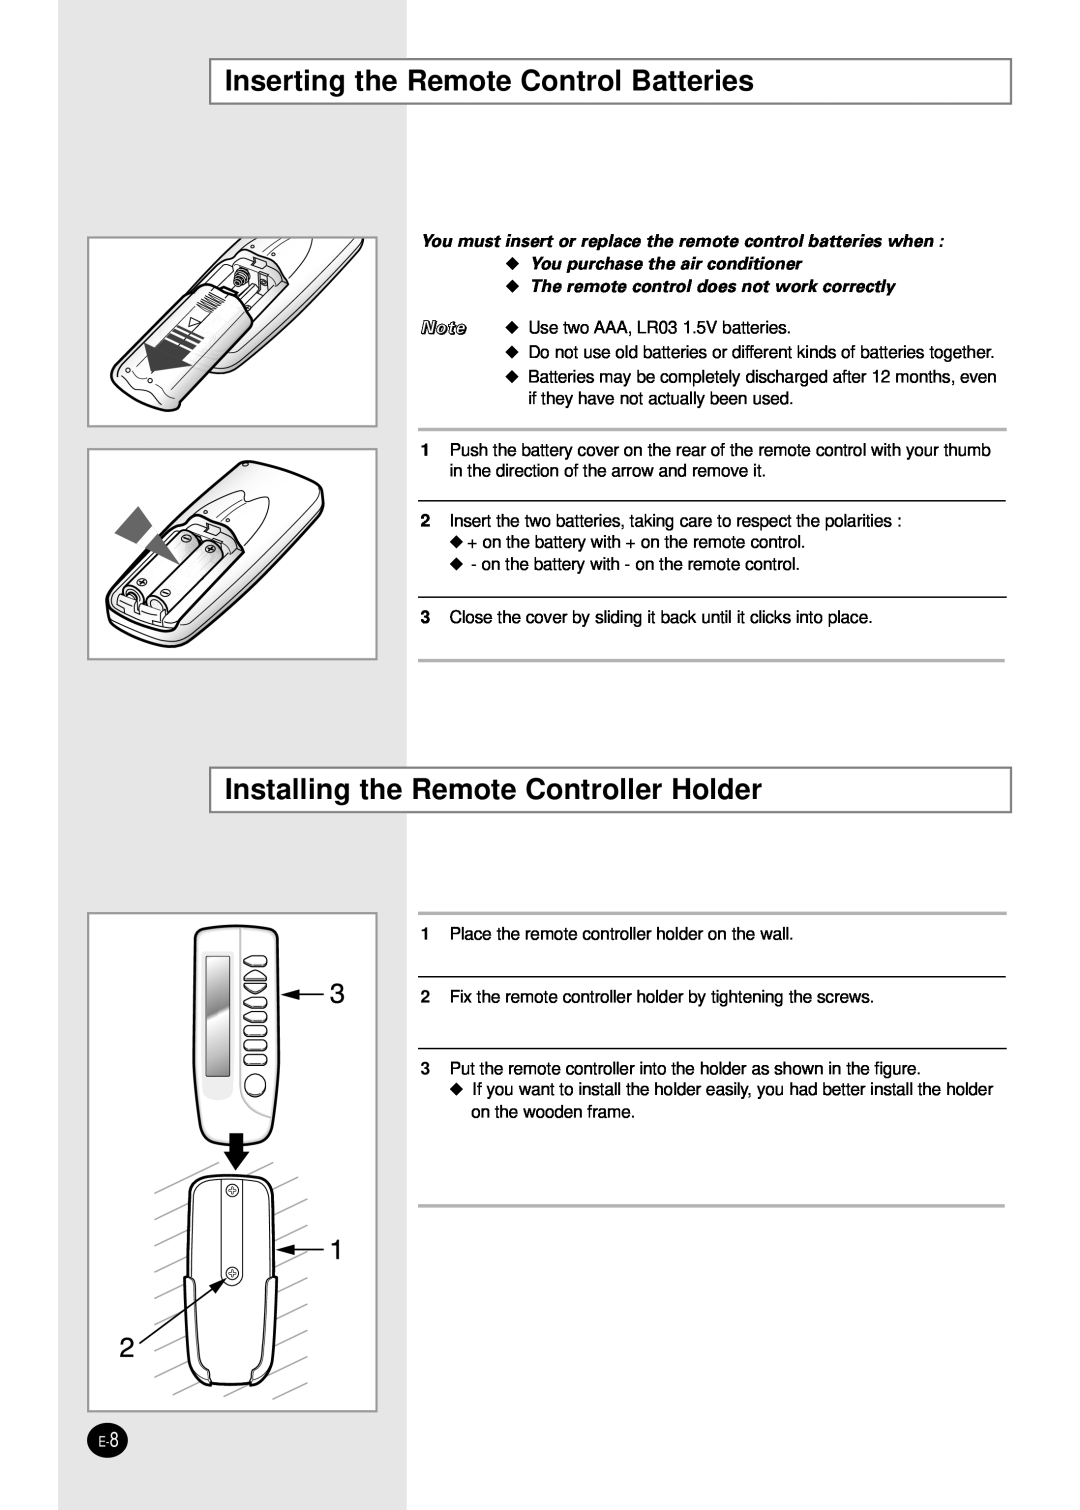 Samsung AM18B1(B2)C09 installation manual Inserting the Remote Control Batteries, Installing the Remote Controller Holder 